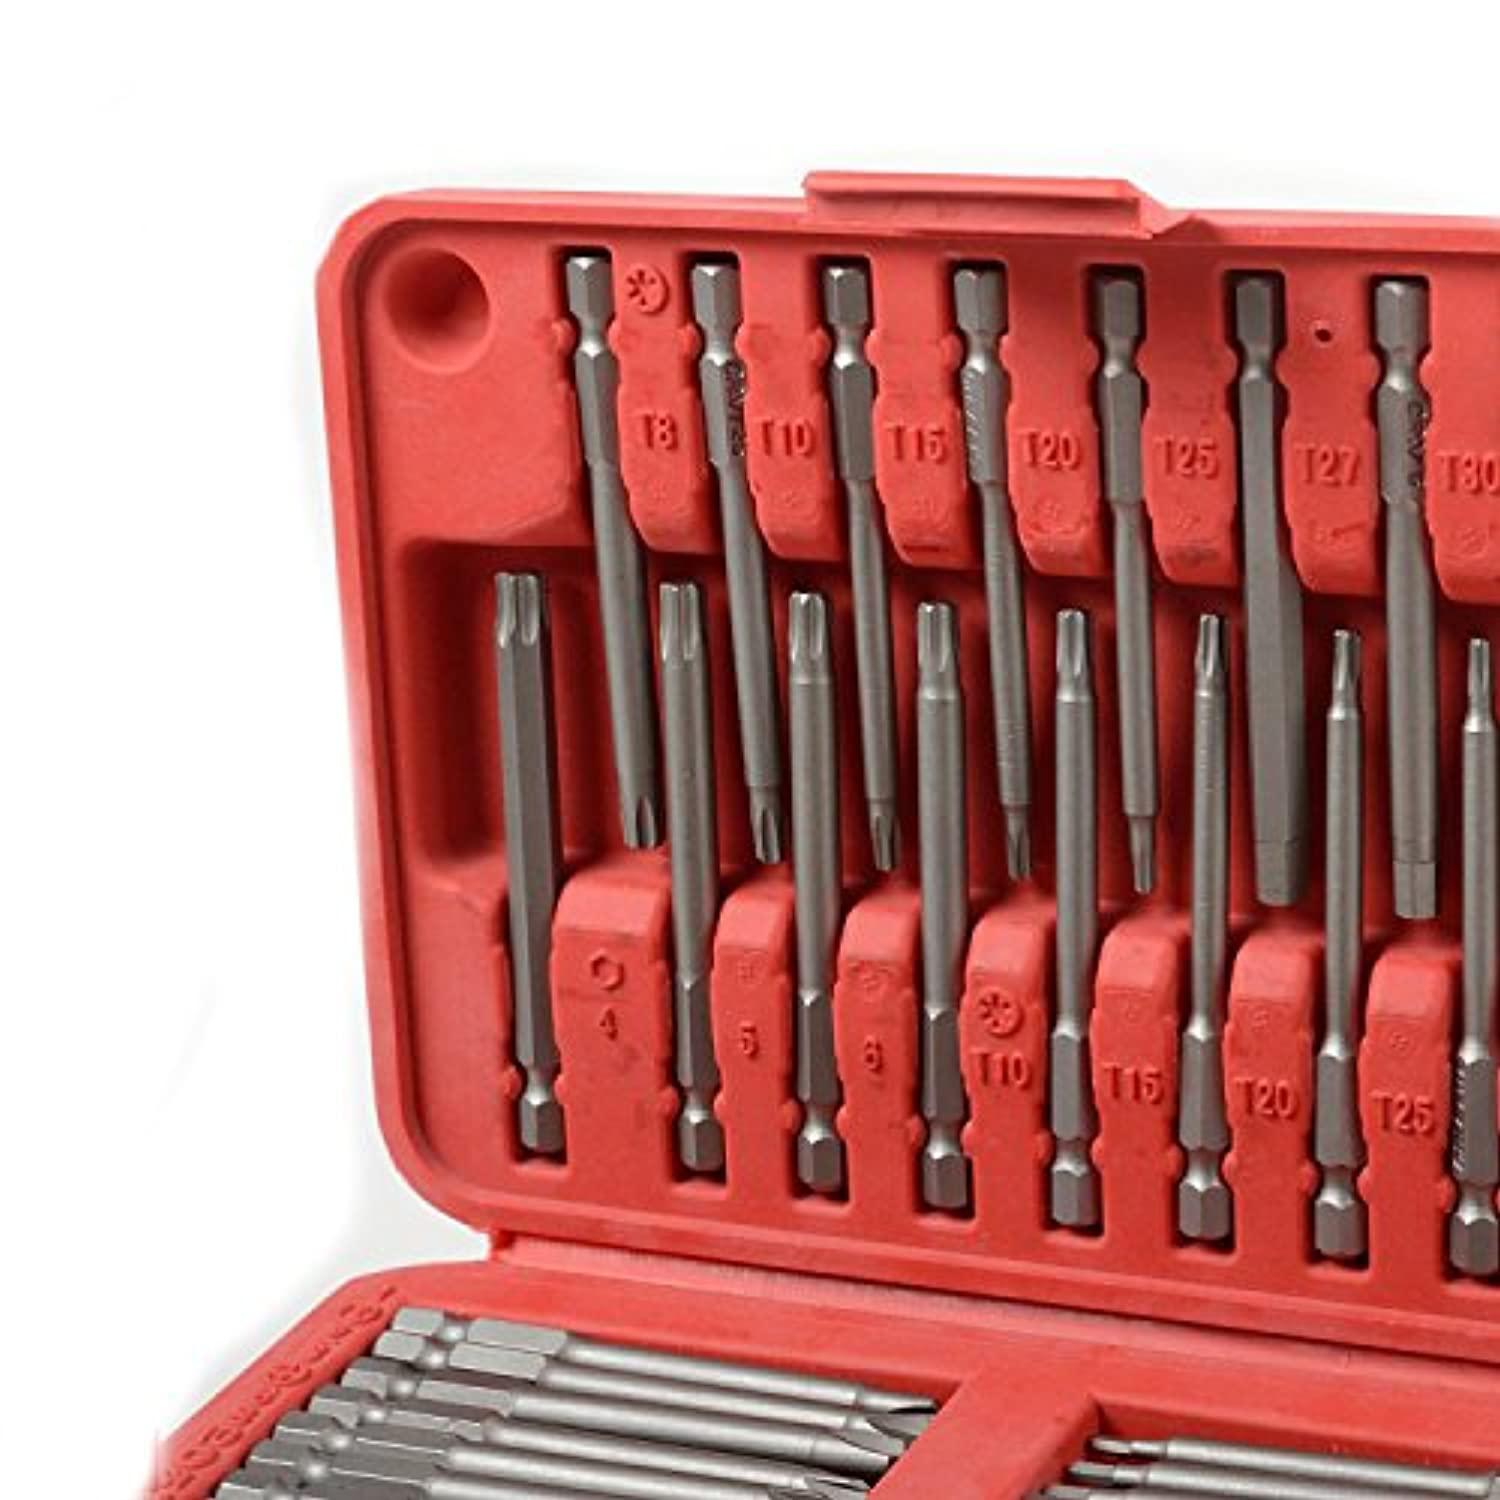 Voyager Tools all in one security bit set torx hex pozidrive bit set 50pc extra long